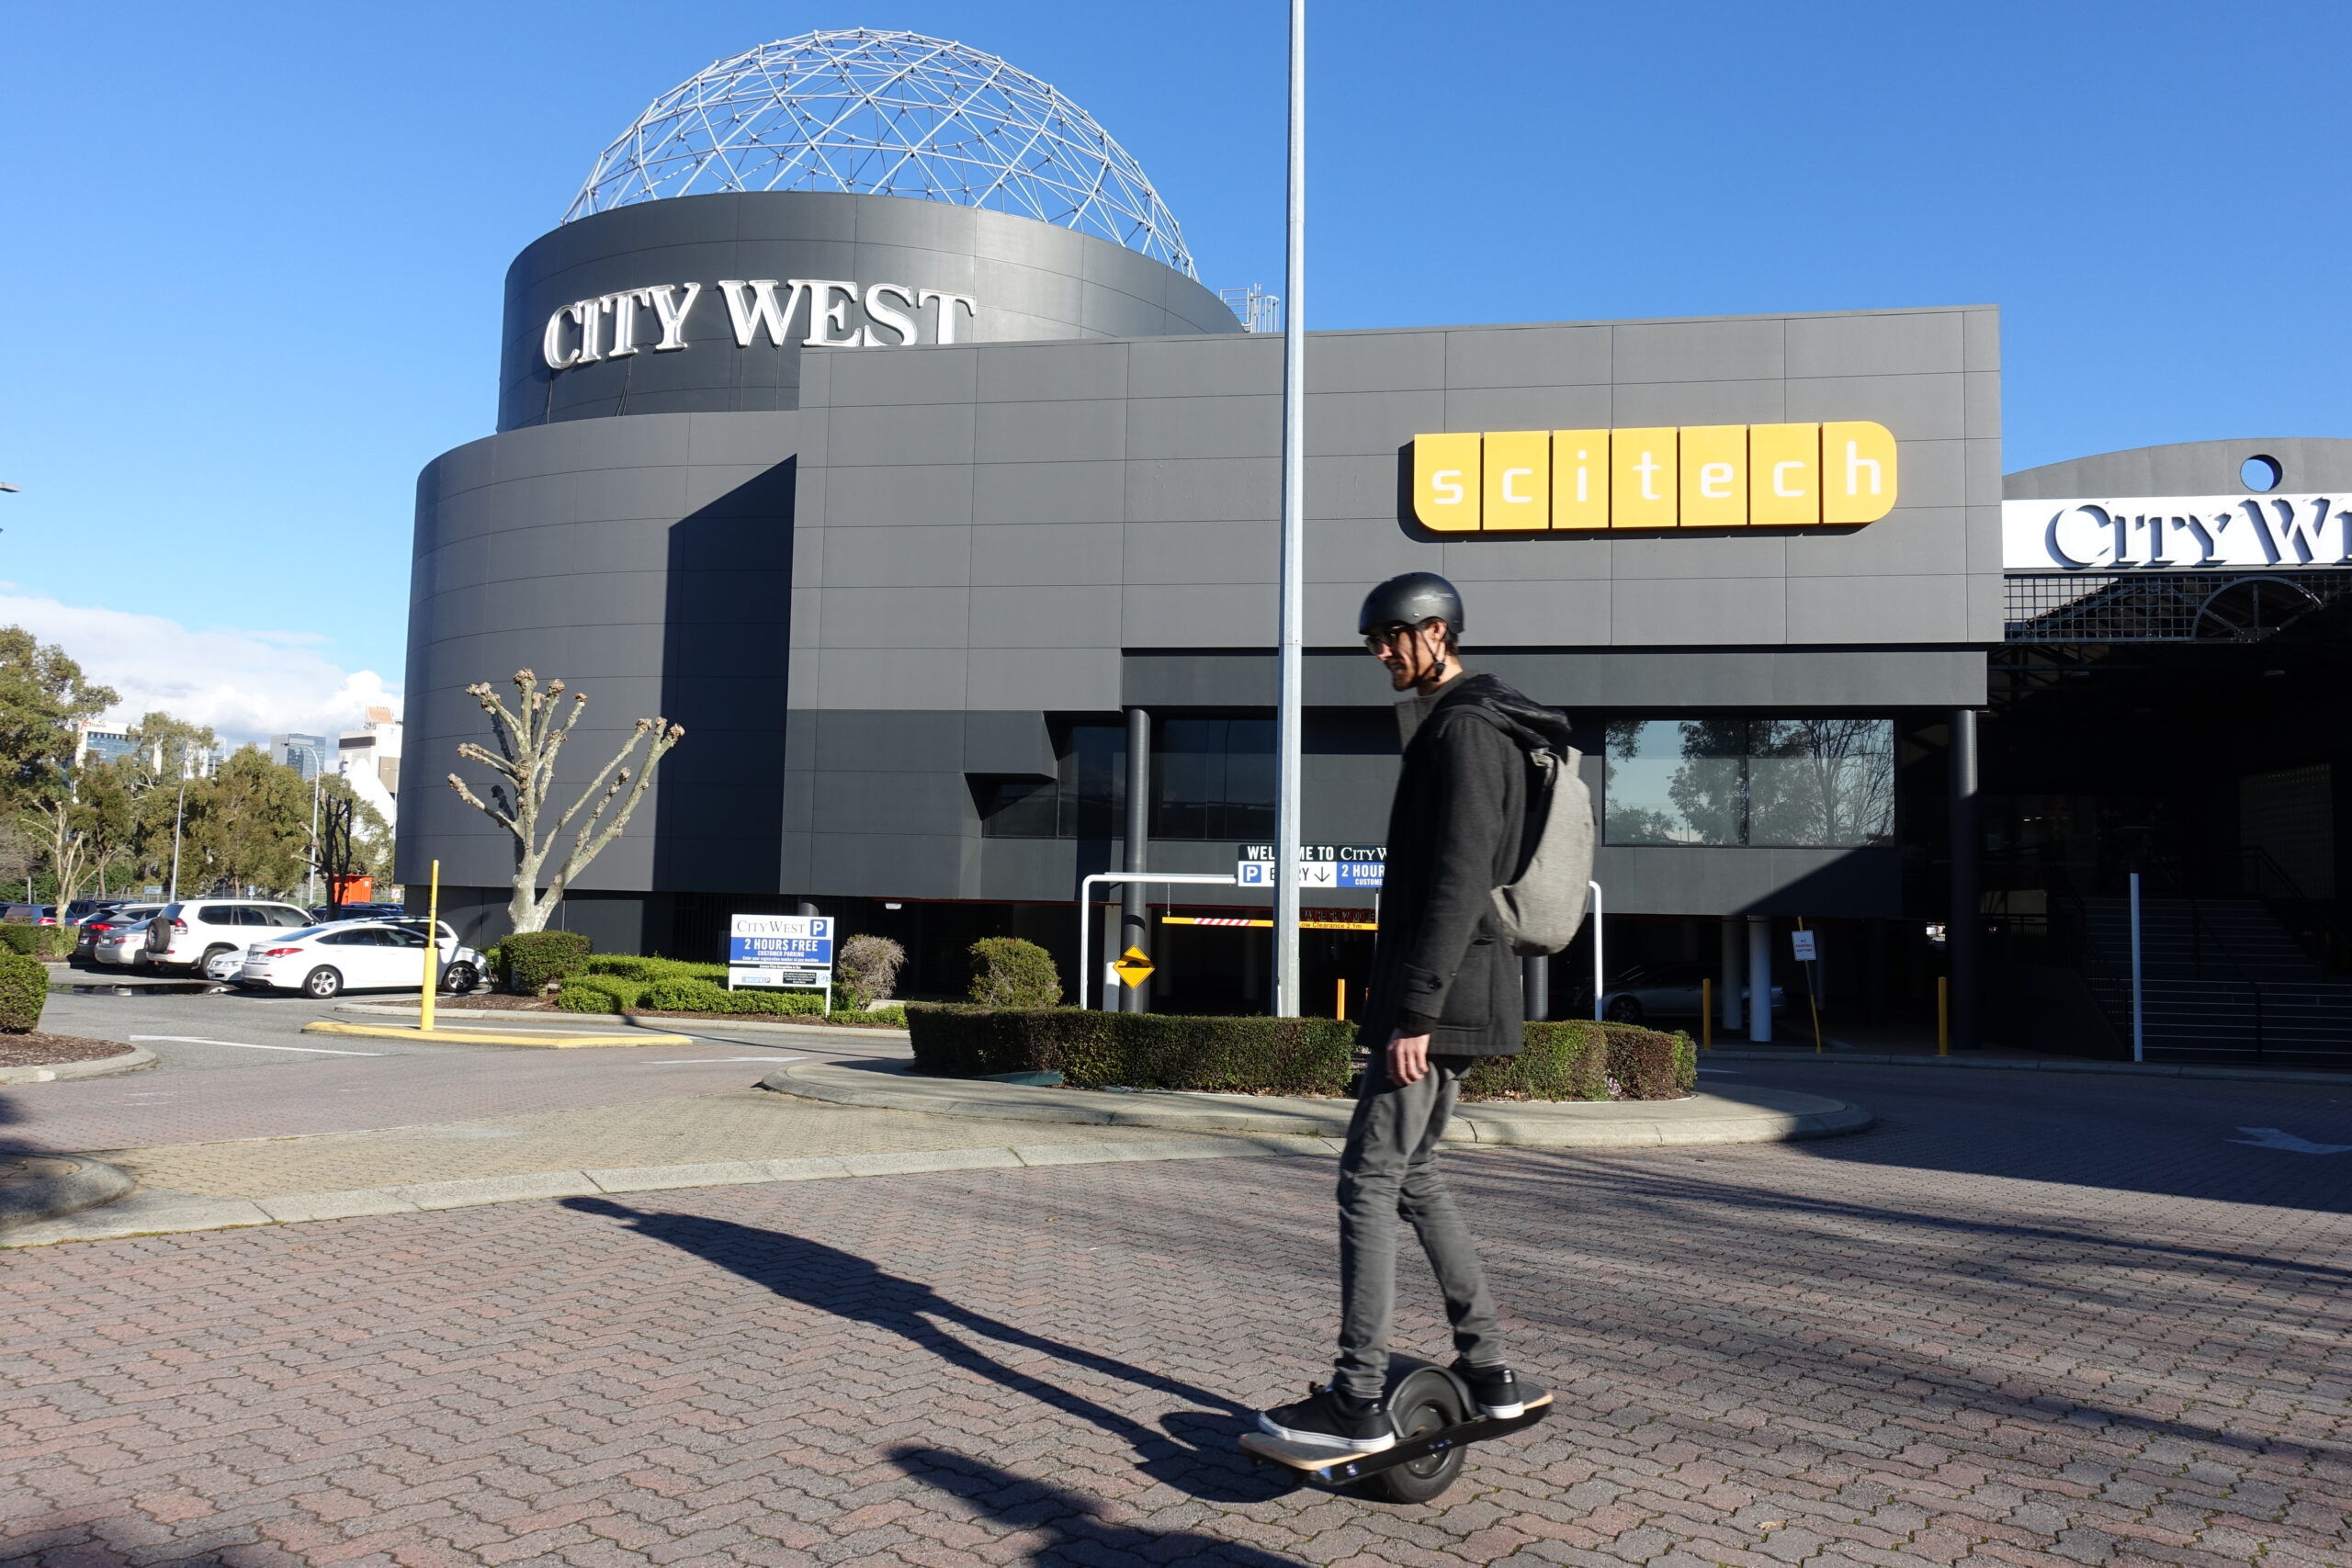 Sam rides Onewheel through a carpark outside Scitech in West Perth